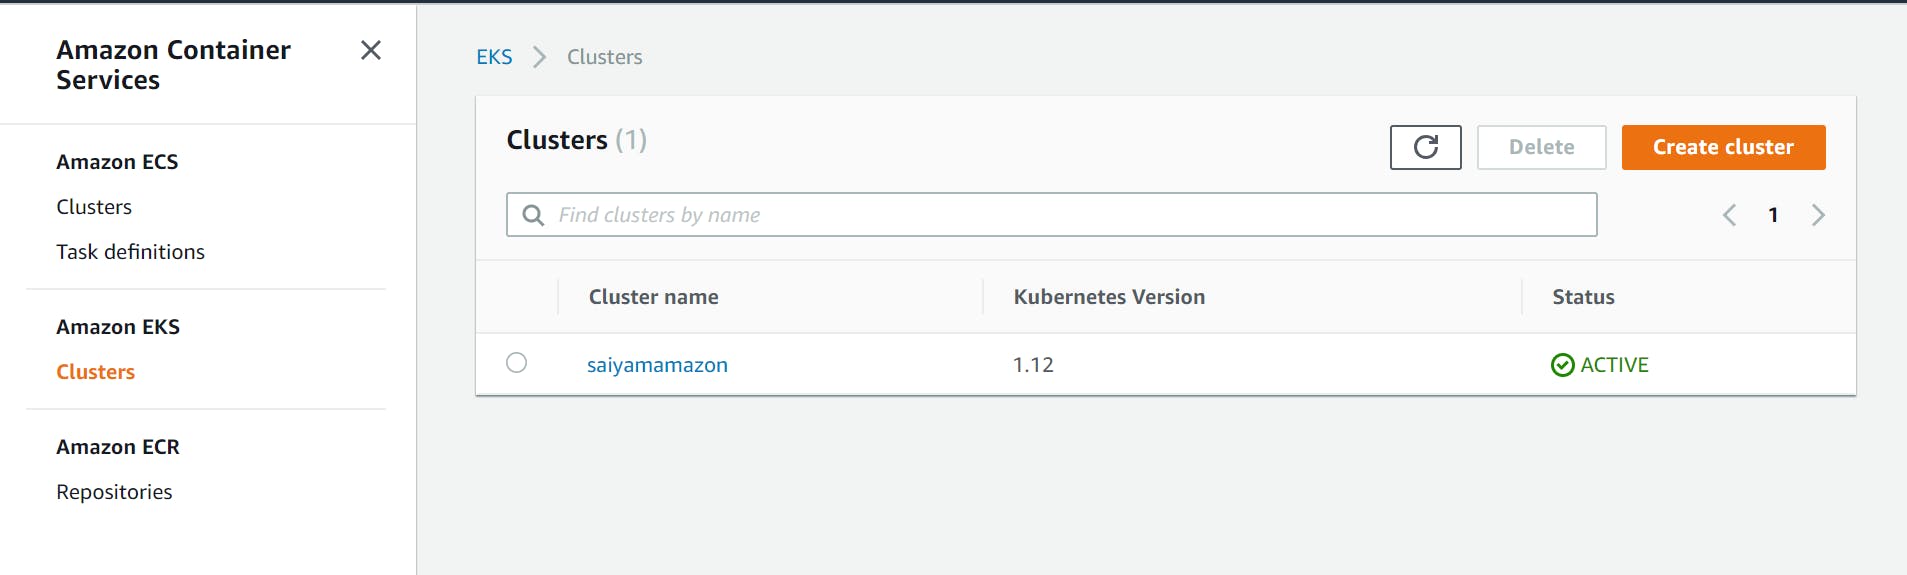 AWS Cluster created